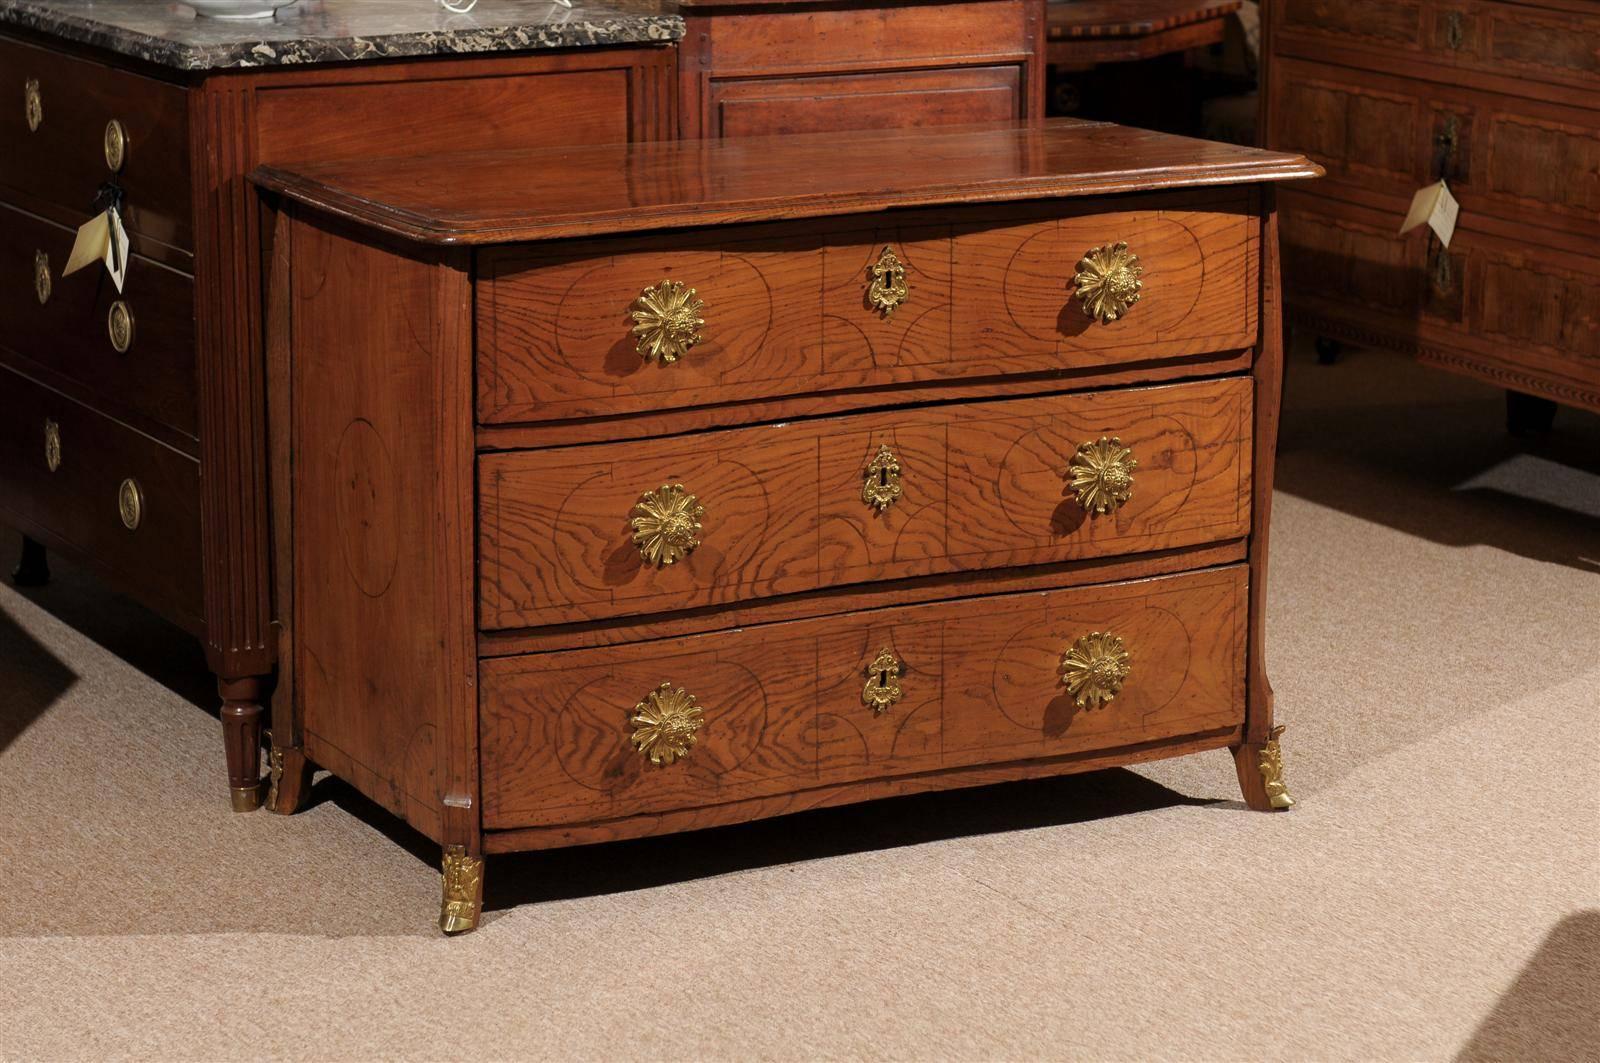 Unusual 18th century Swedish oak commode with inlaid designs and bronze doré hardware, serpentine front.